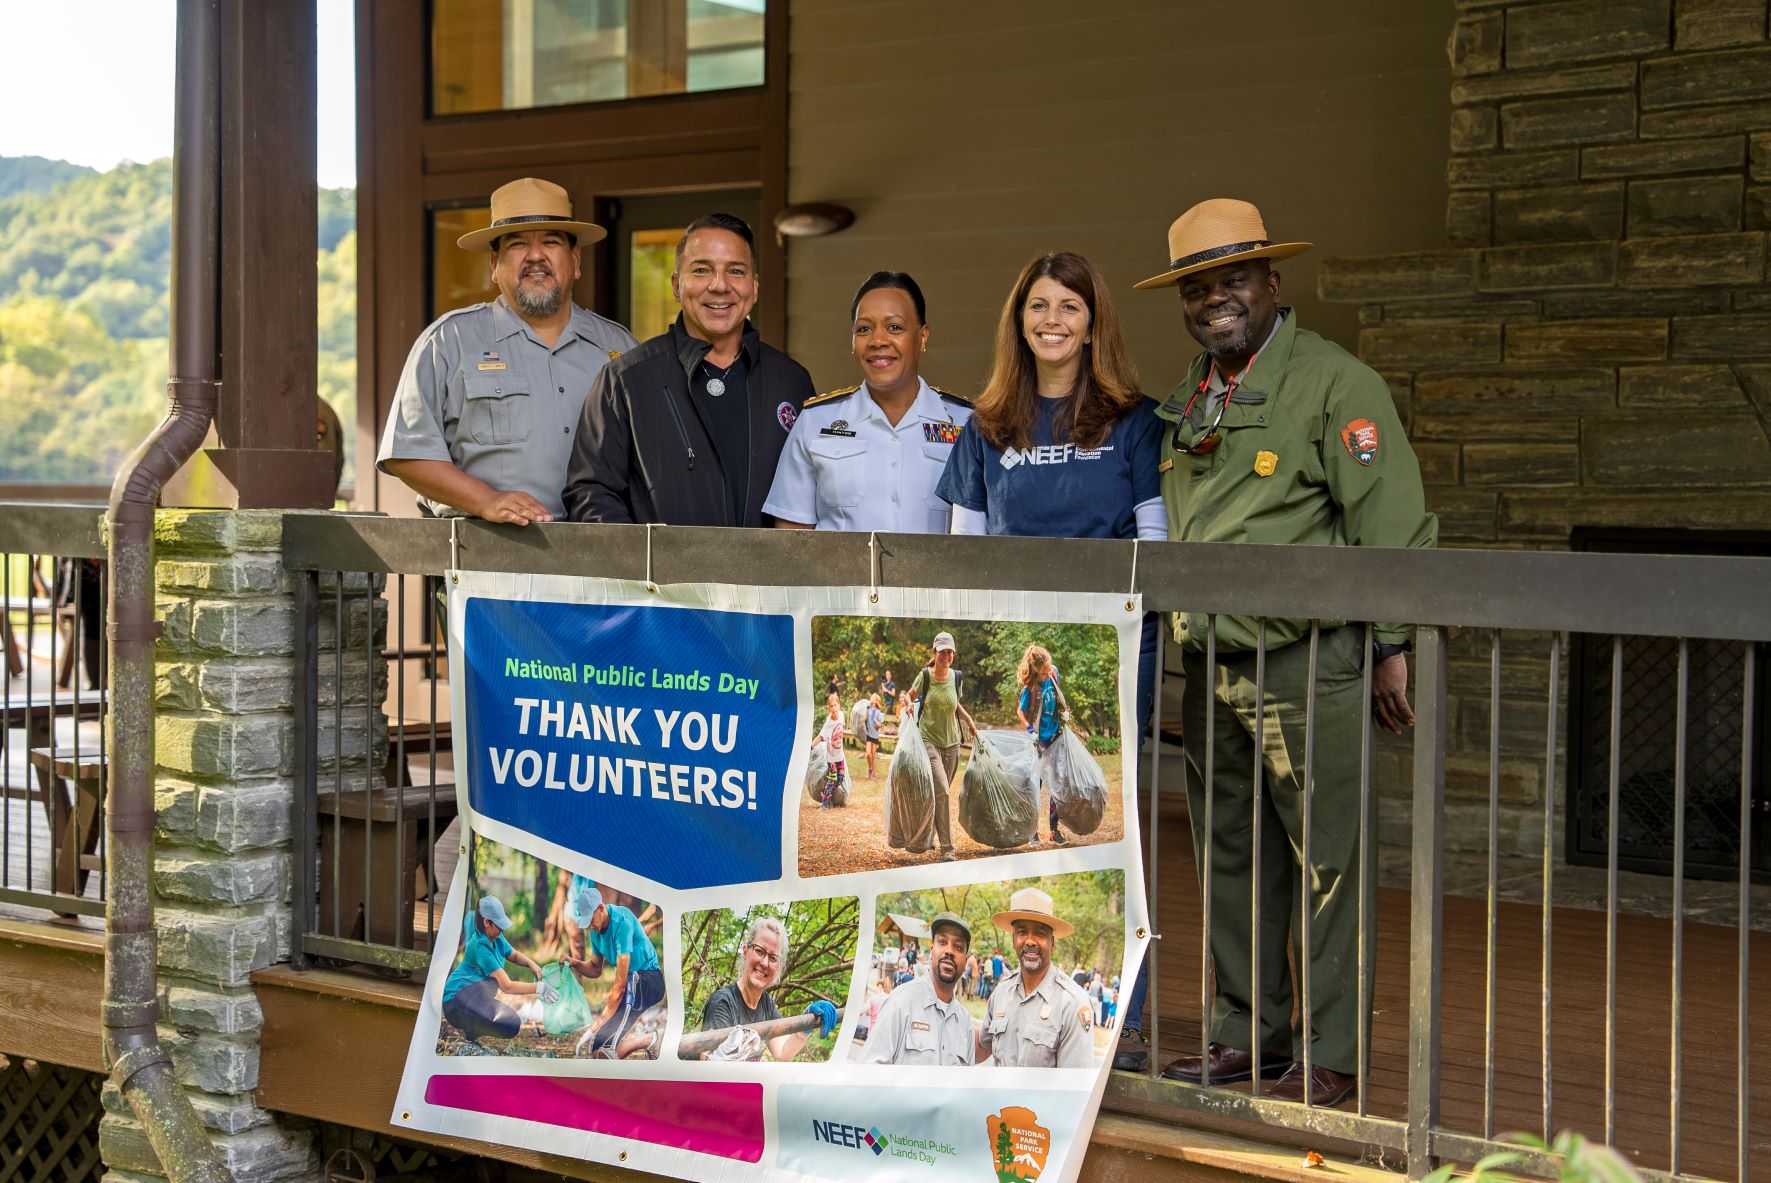 A group of five people standing on a porch behind a sign that reads "National Public Lands Day, Thank You Volunteers!"